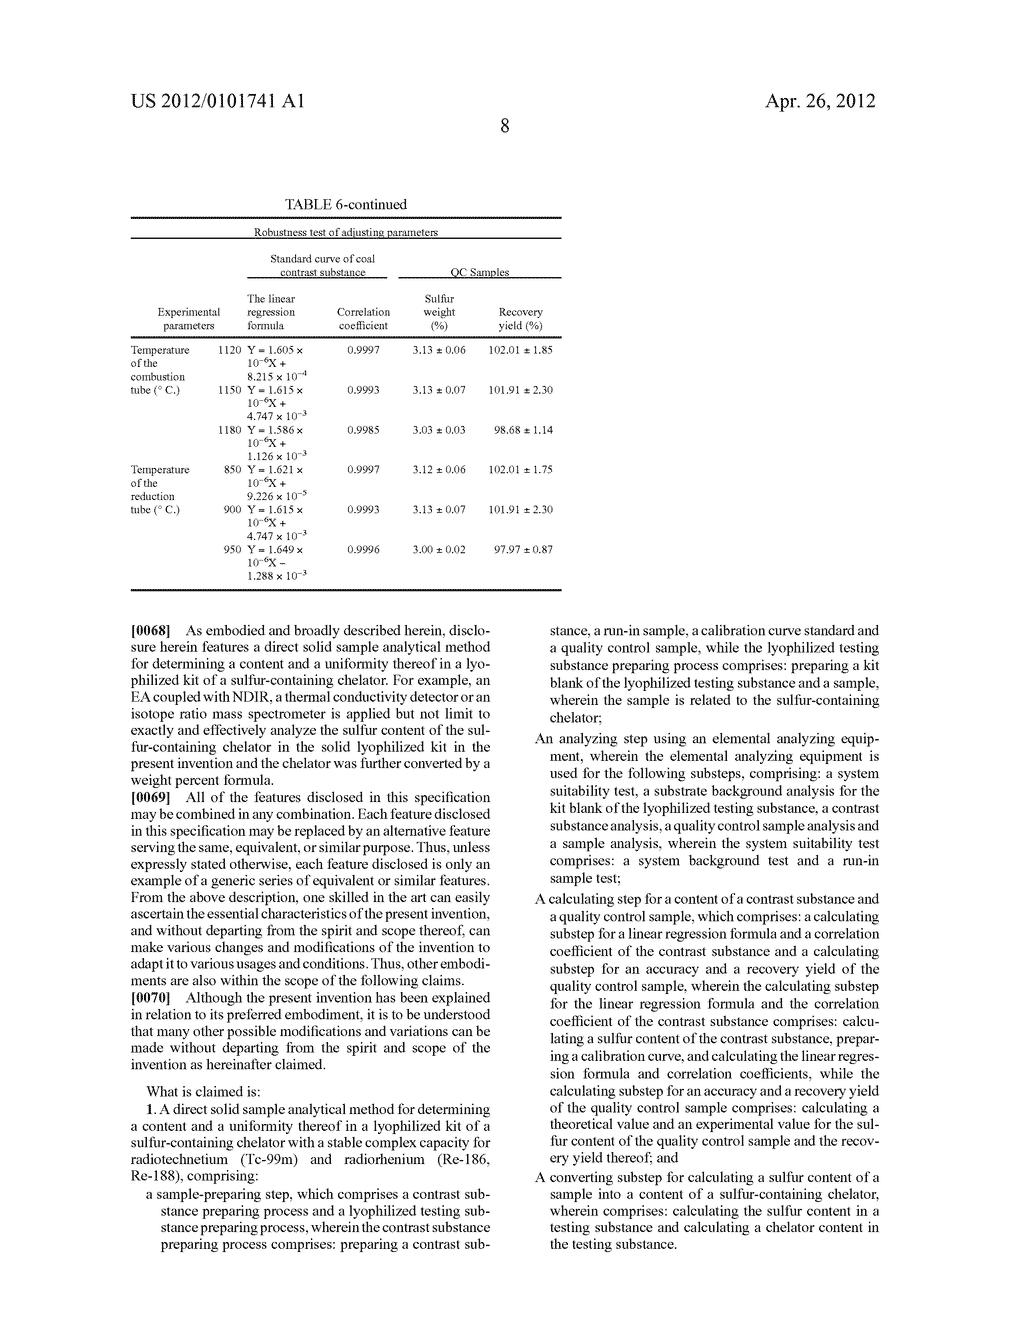 DIRECT SOLID SAMPLE ANALYTICAL TECHNOLOGY FOR DETERMINING A CONTENT AND A     UNIFORMITY THEREOF IN A LYOPHILIZED KIT OF A SULFUR-CONTAINING CHELATOR     WITH A STABLE COMPLEX CAPACITY FOR RADIOTECHNETIUM (TC-99M) AND     RADIORHENIUM (RE-186, RE-188) - diagram, schematic, and image 11